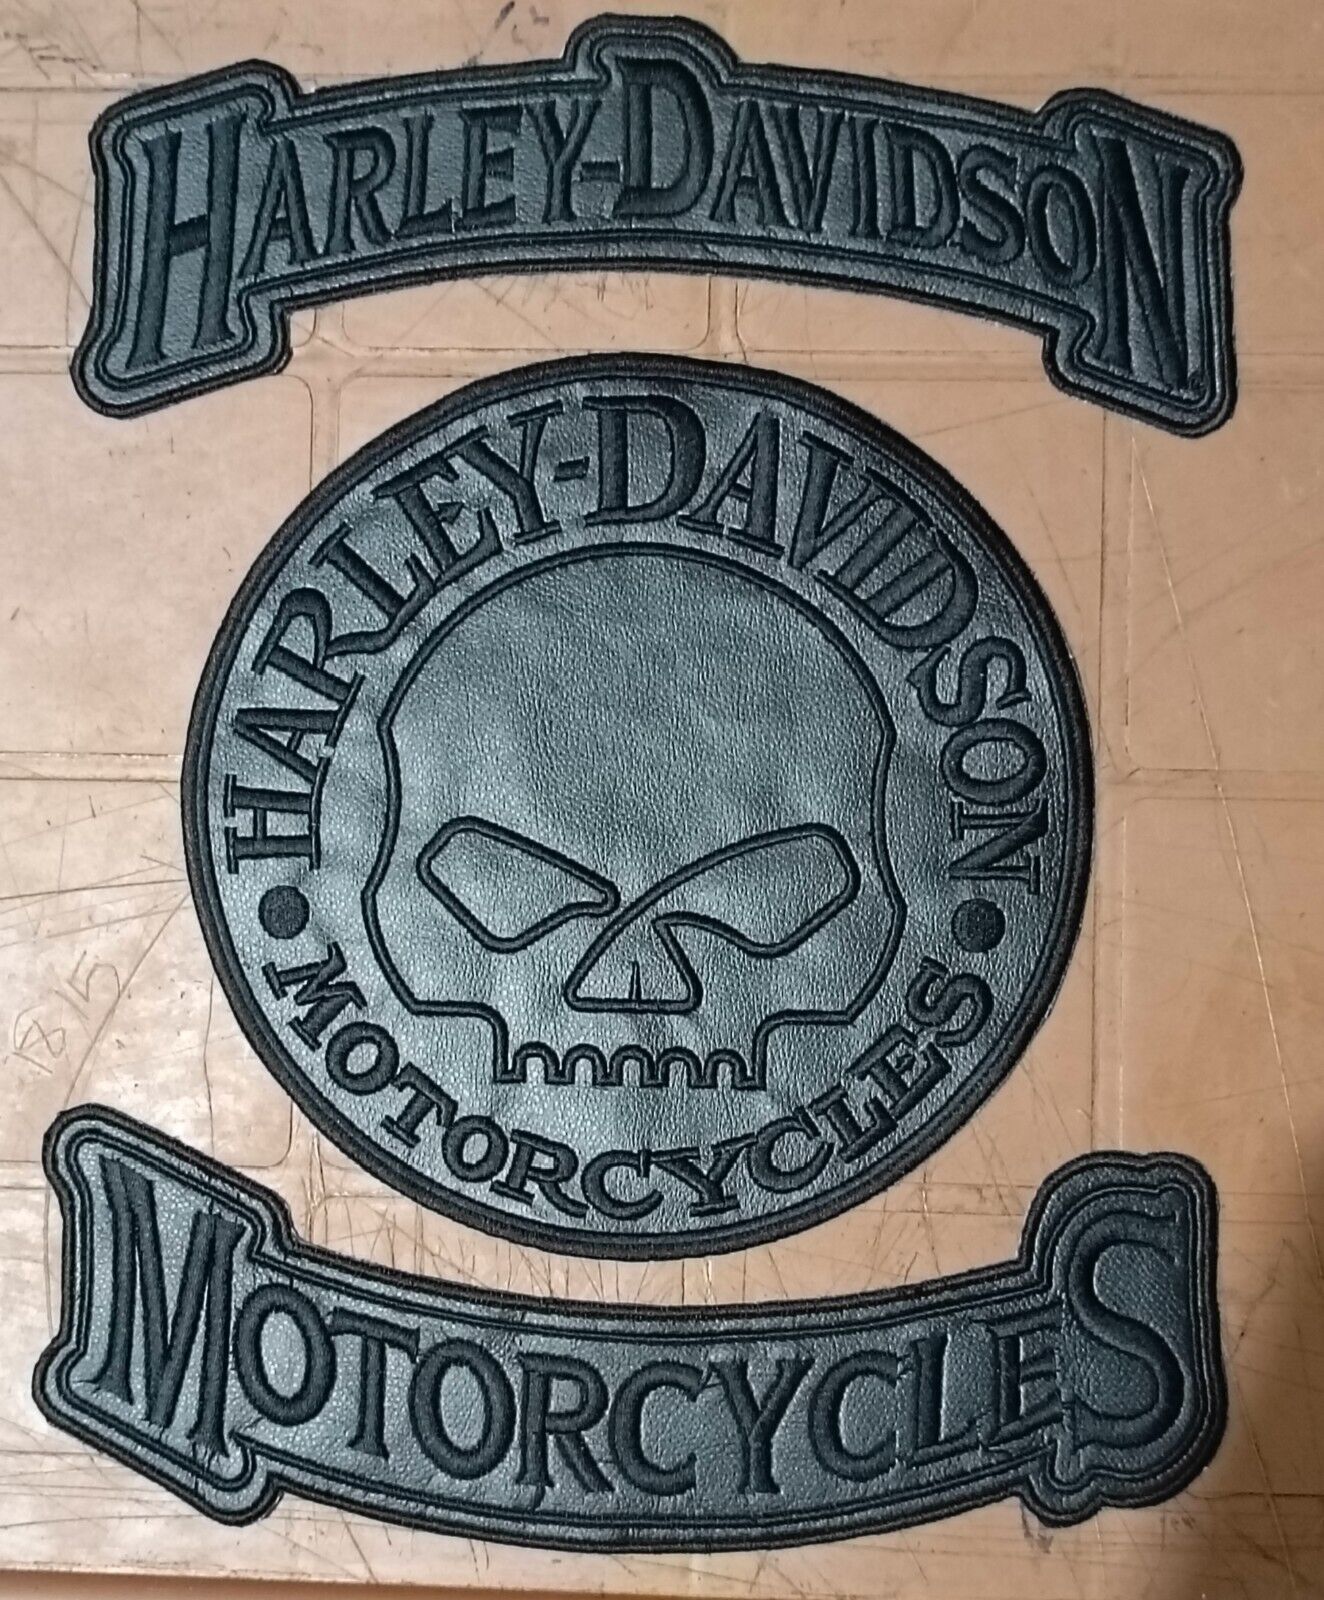 Harley Davidson black on artificial leather Rockers and Willie G. Skull Patch